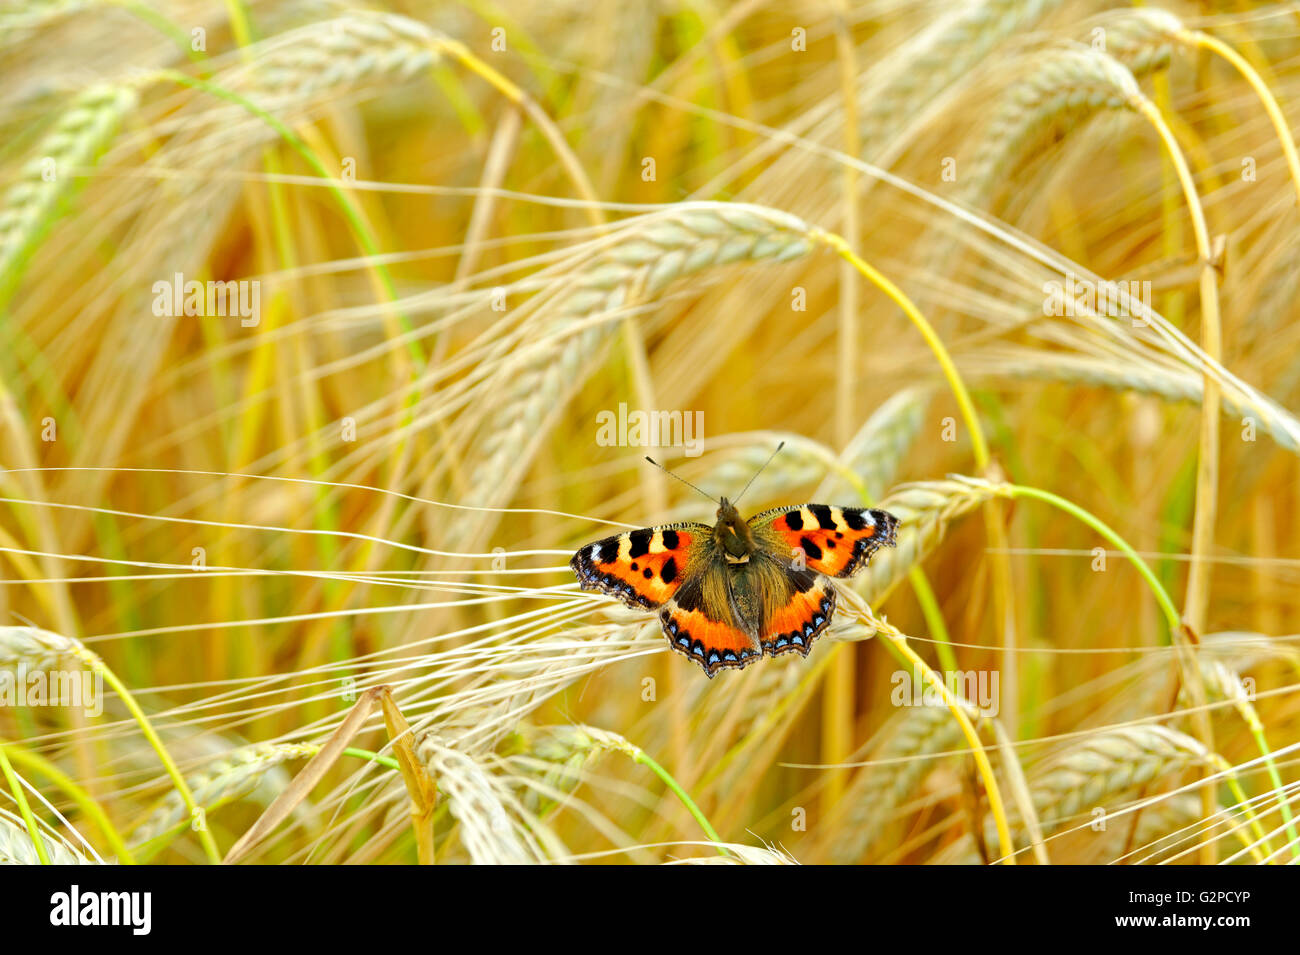 SMALL TORTOISESHELL BUTTERFLY IN A WHEAT FIELD Stock Photo